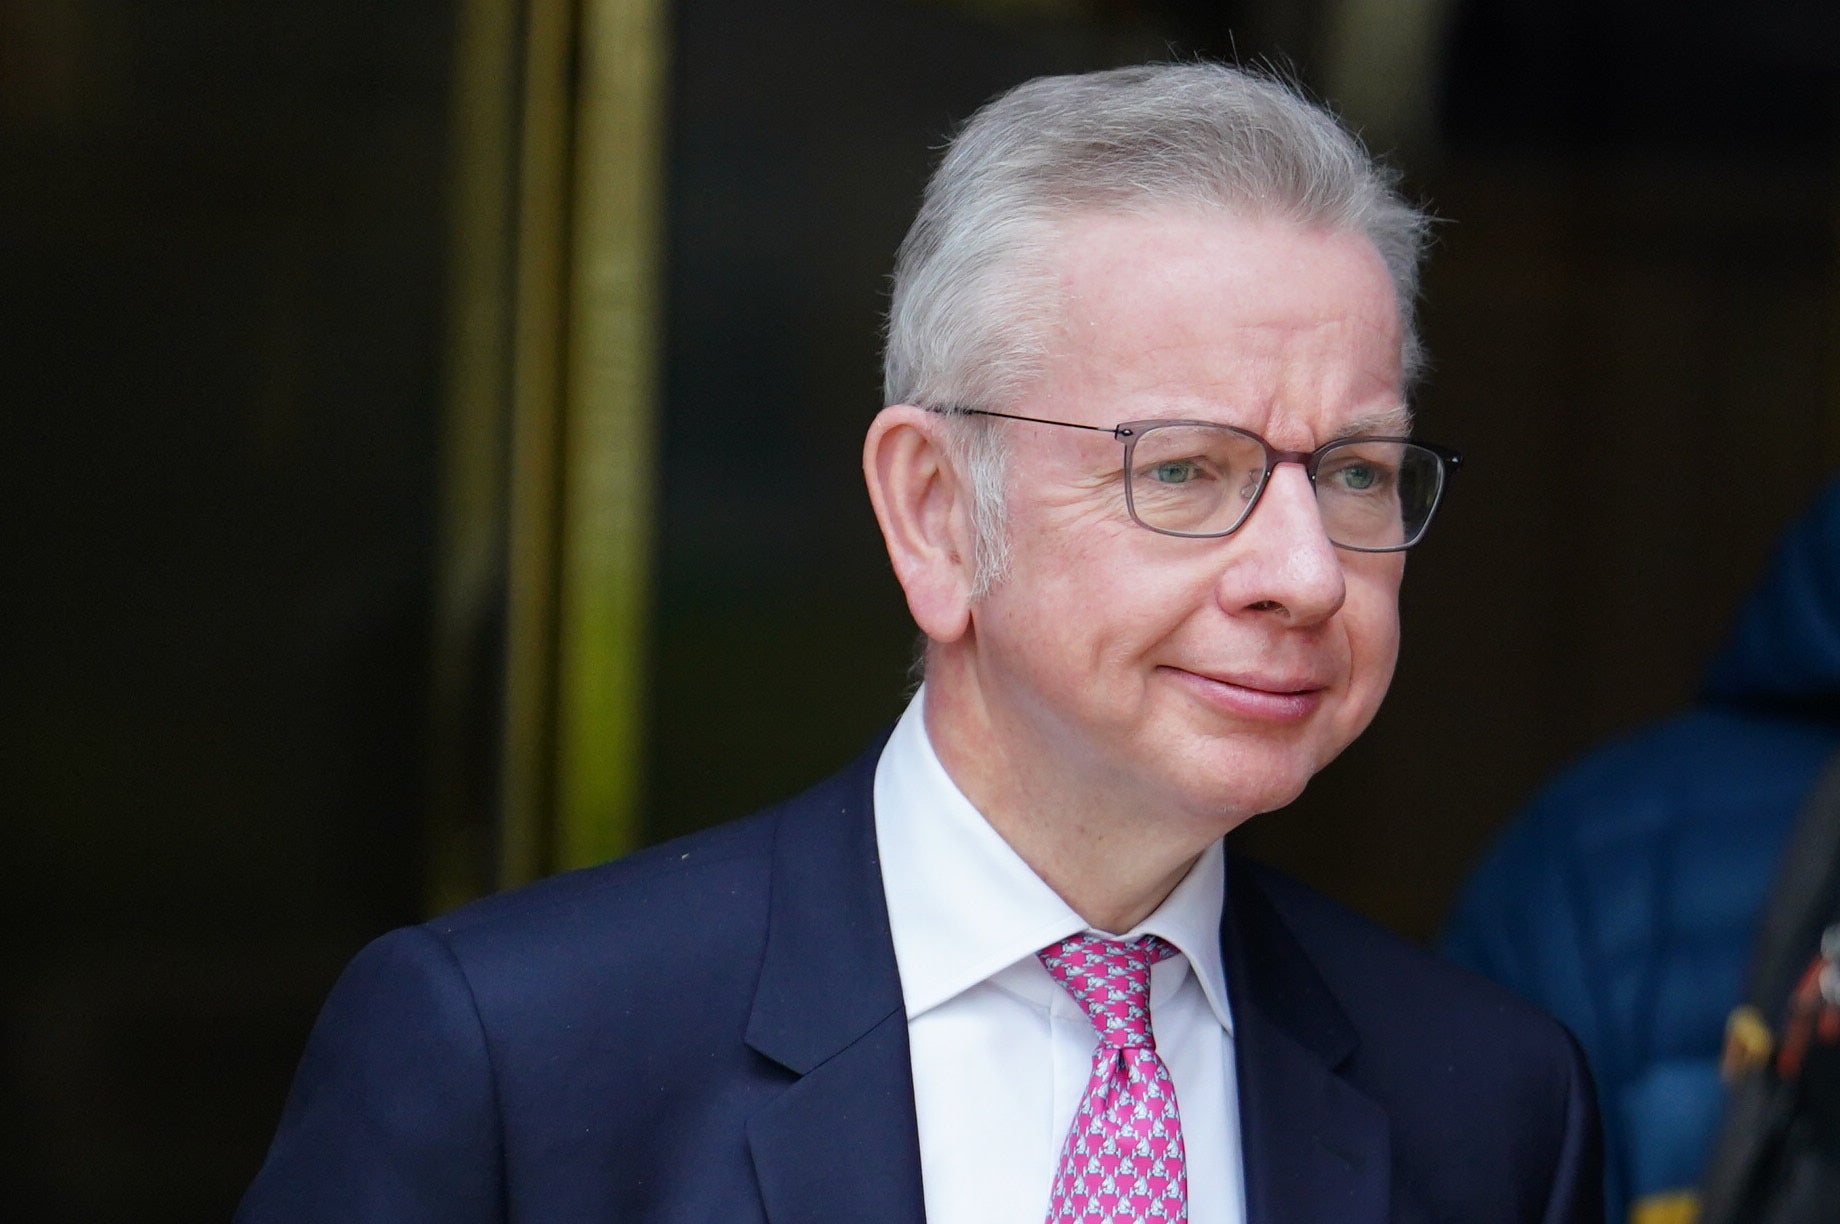 Michael Gove has said that a number of organisations could be subject to restrictions under new measures announced today